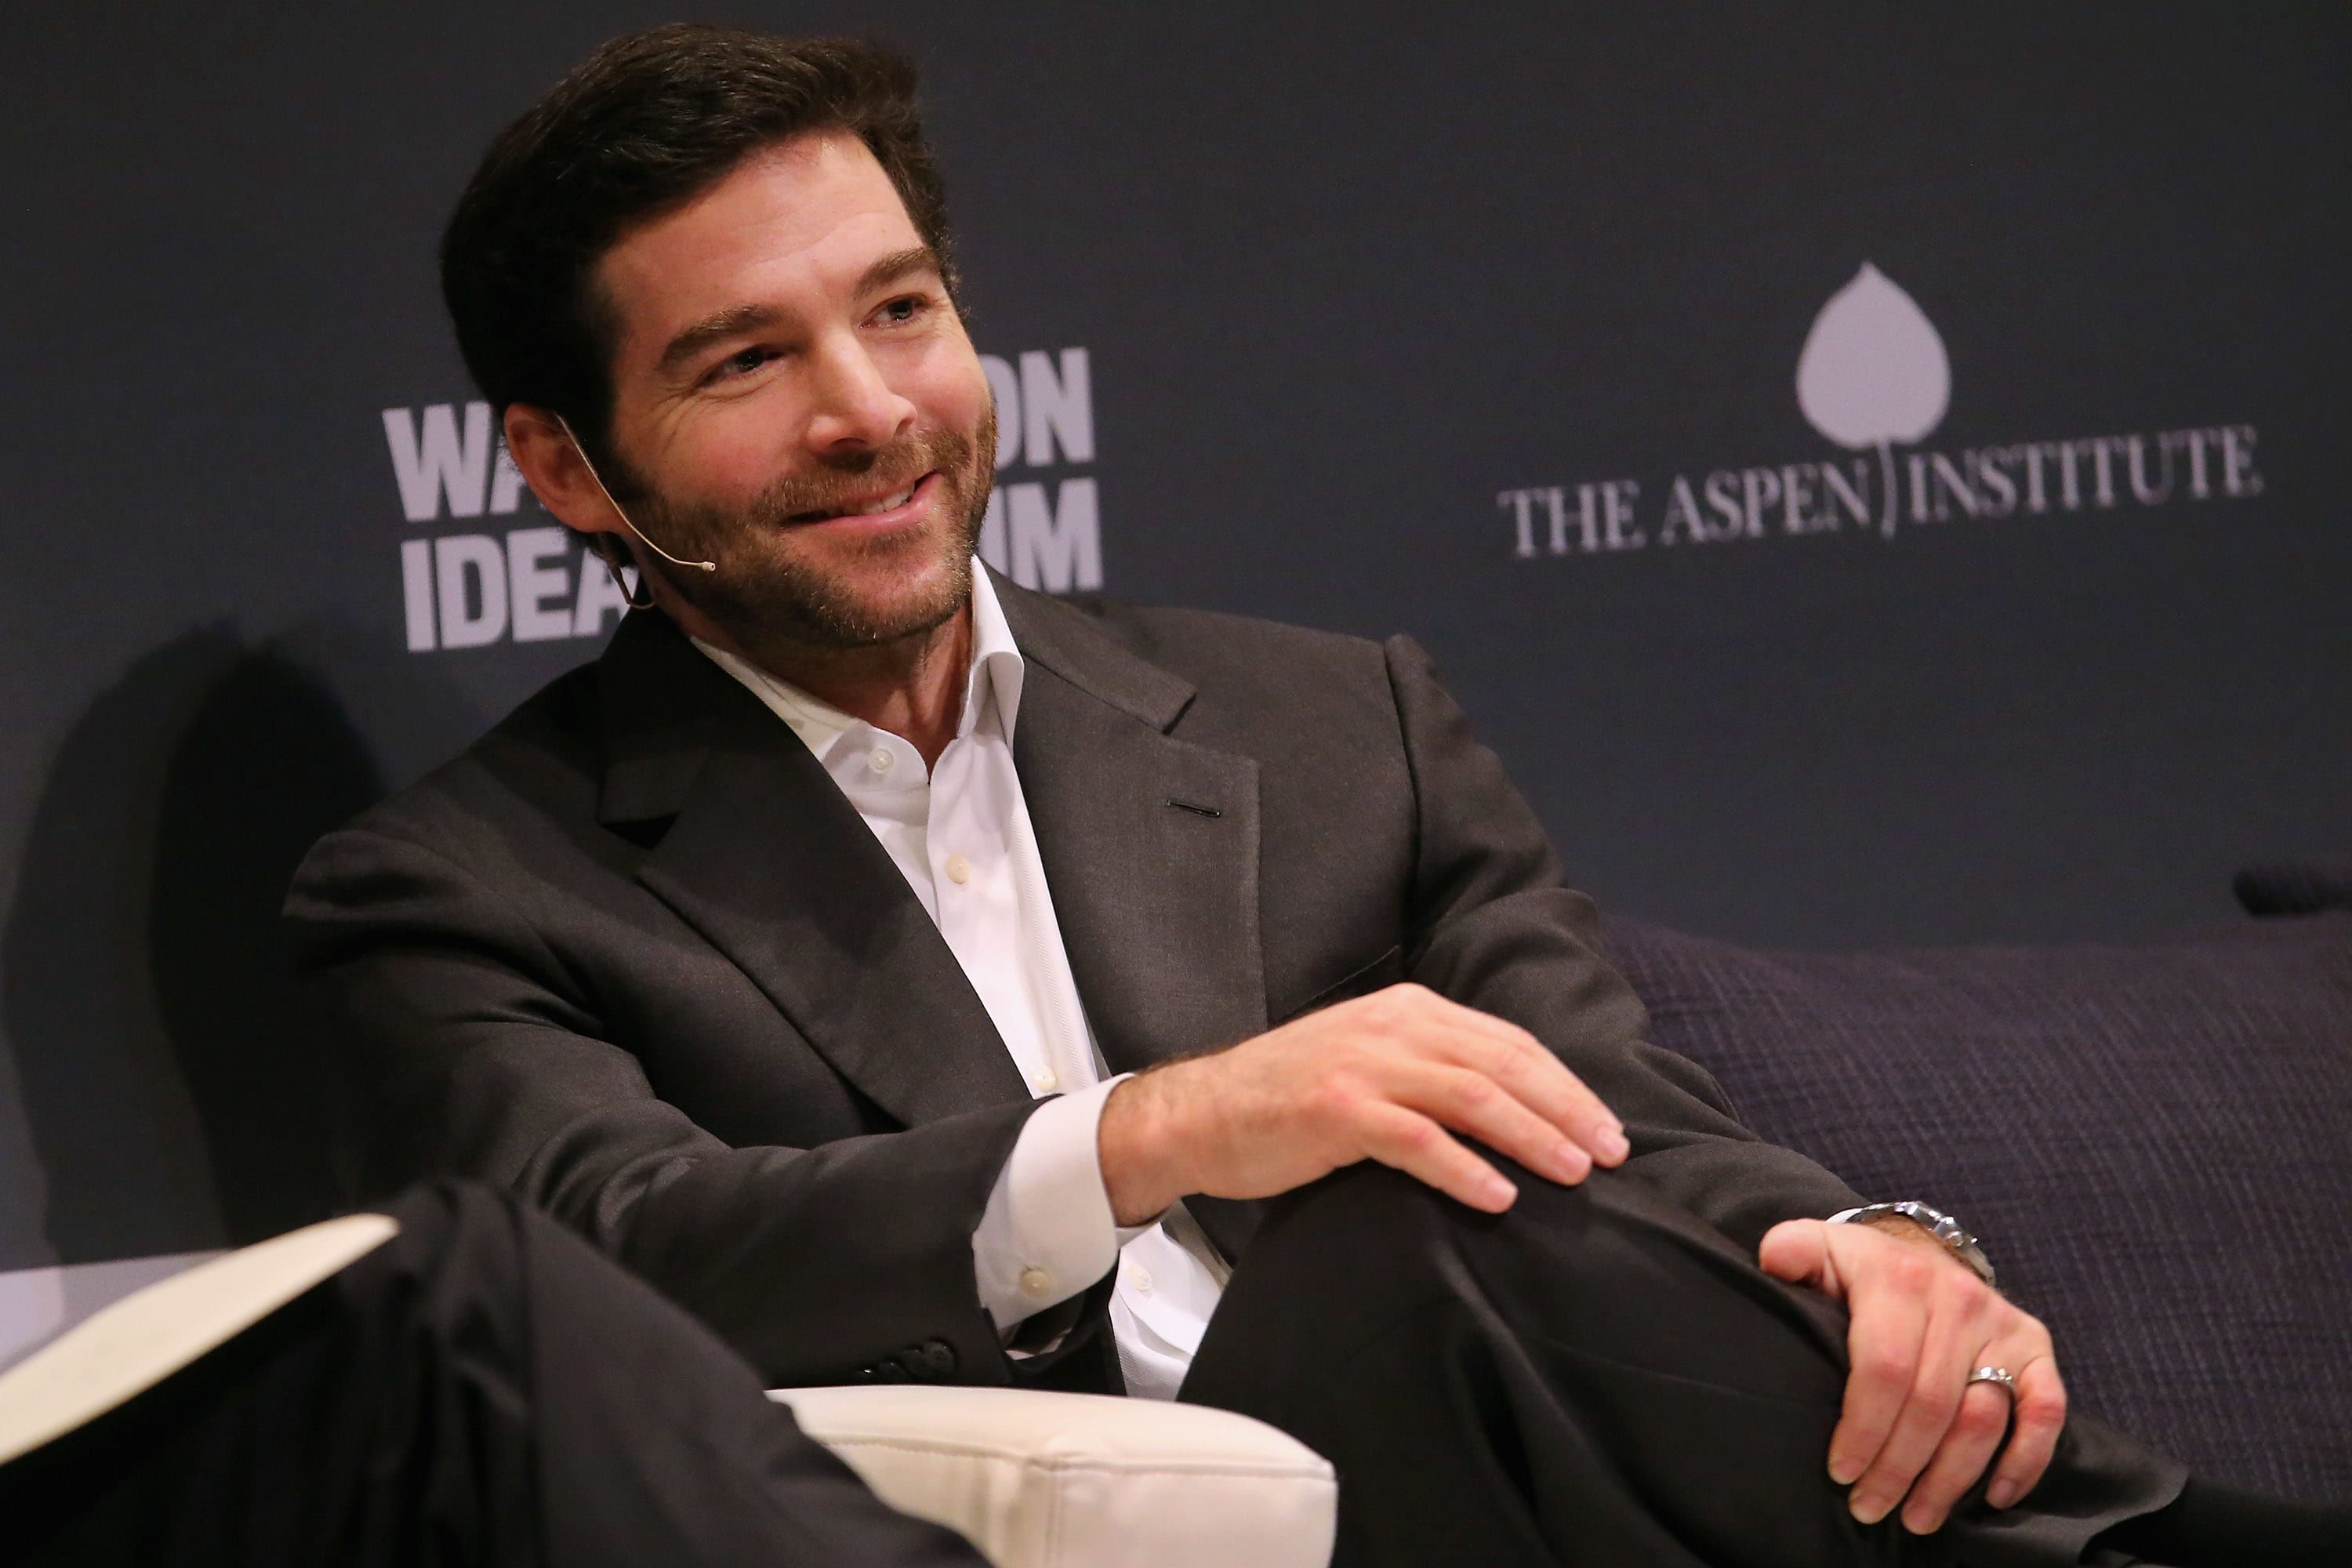 Microsoft paid $26 billion for LinkedIn, then mostly left it alone - and CEO Jeff Weiner is good with that